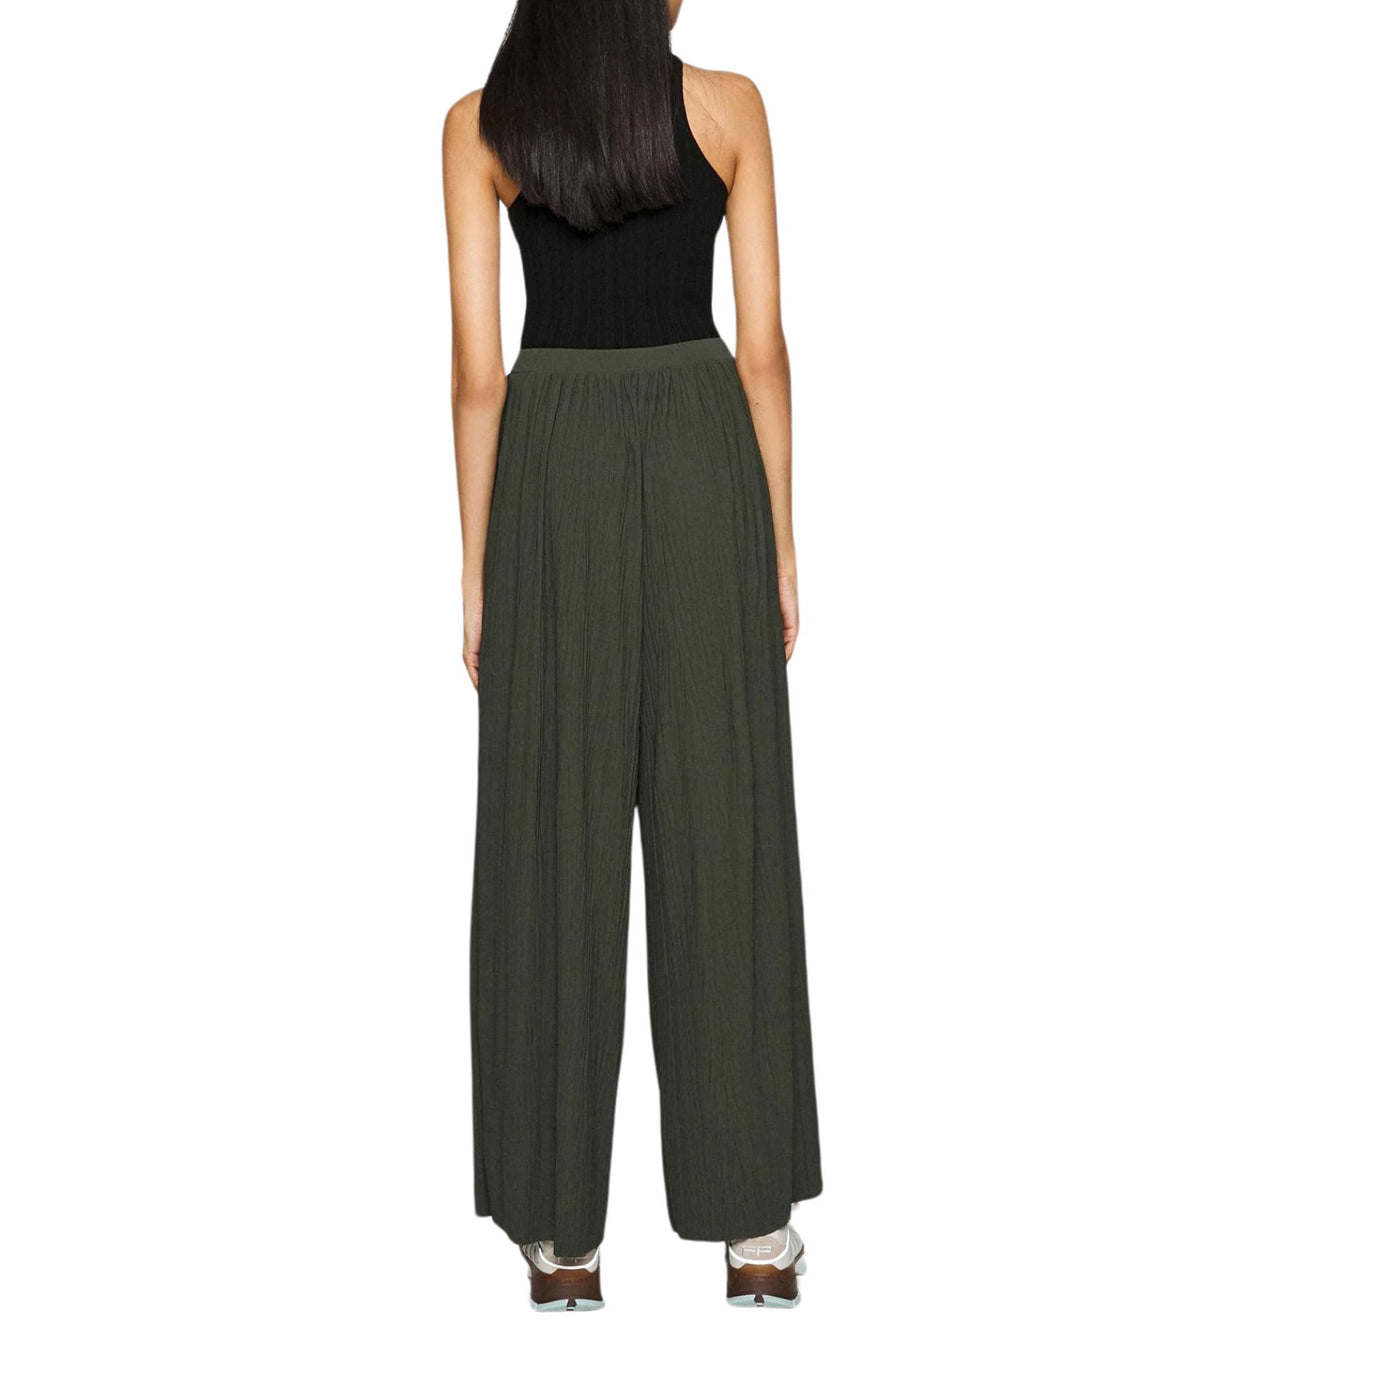 Women's trousers with wide leg